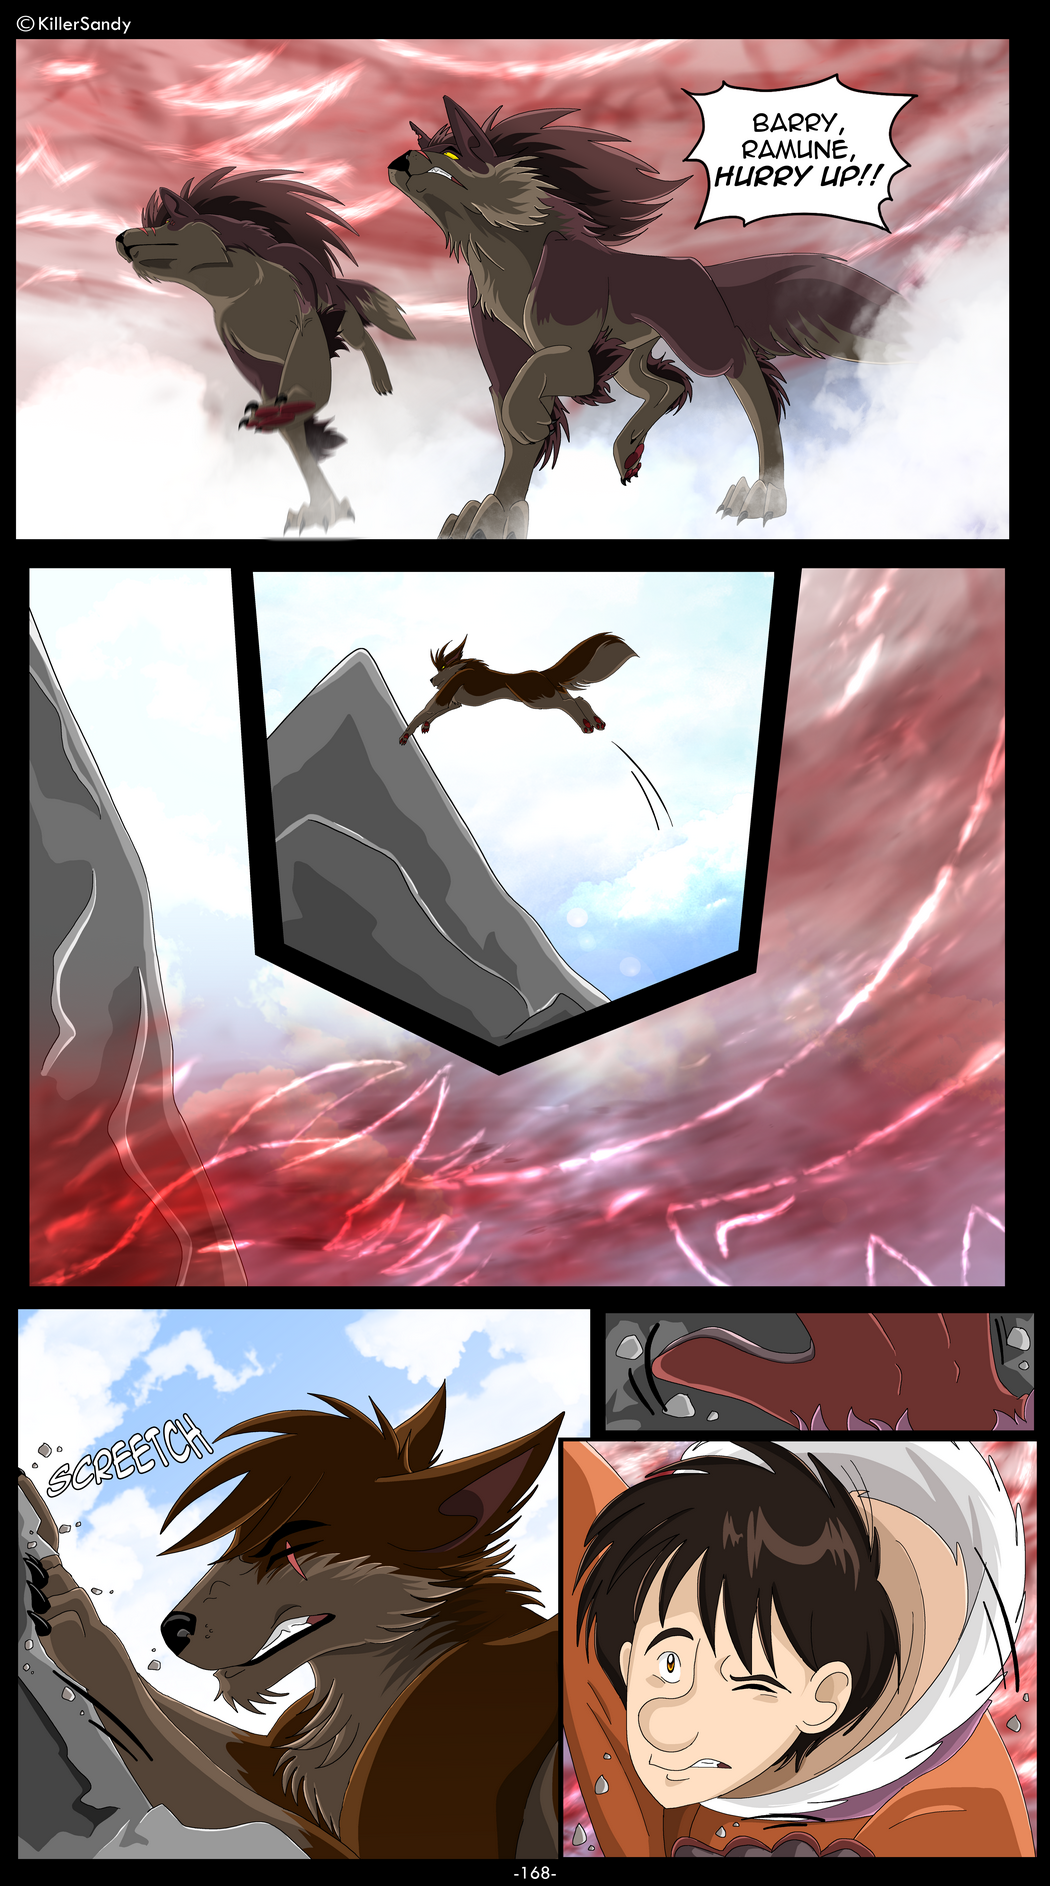 The Prince of the Moonlight Stone page 168